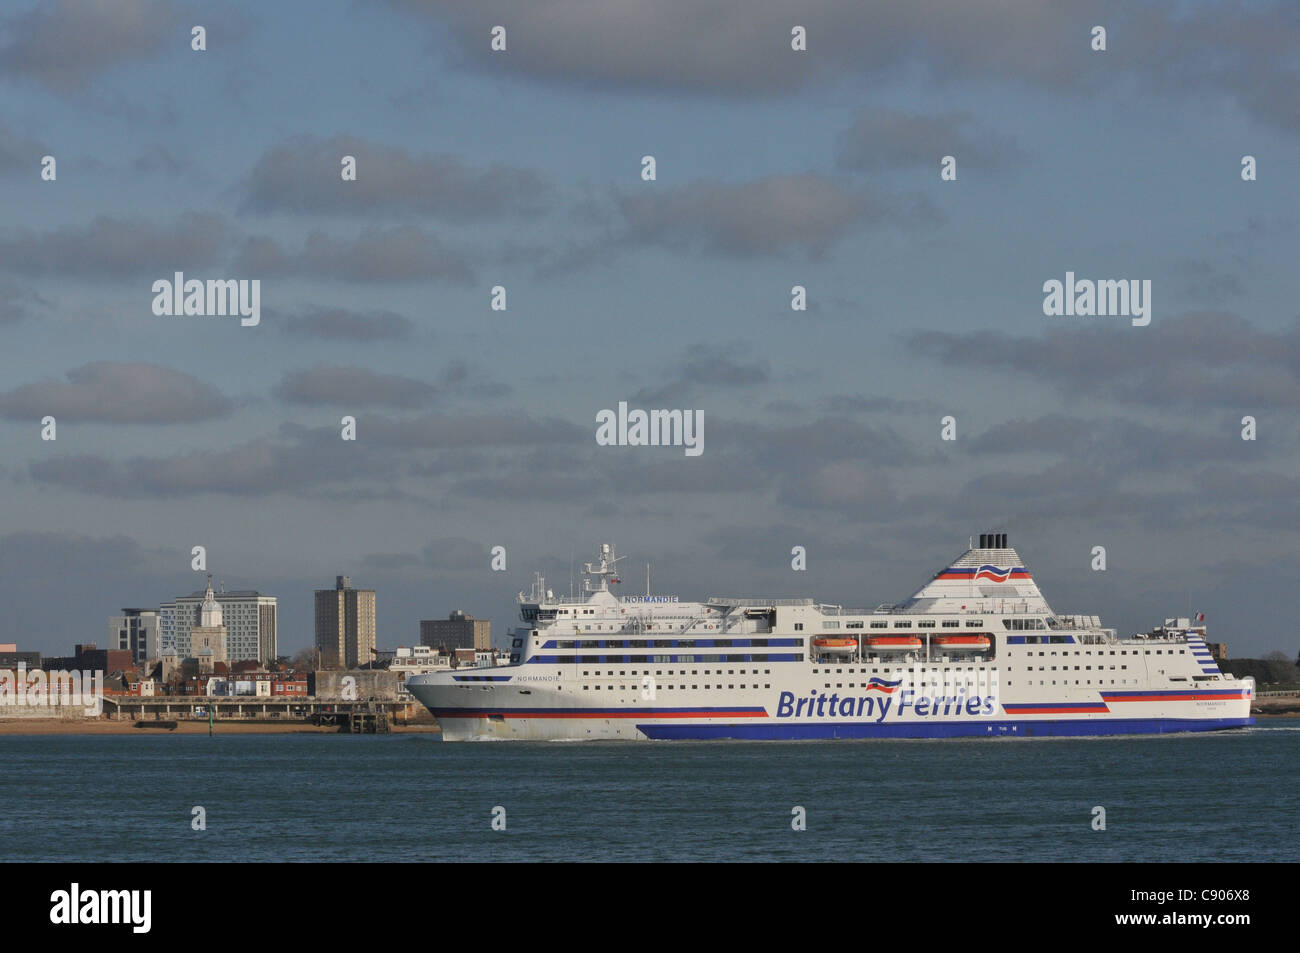 THE BRITTANY FERRY NORMANDIE ENTERS PORTSMOUTH HARBOUR Stock Photo